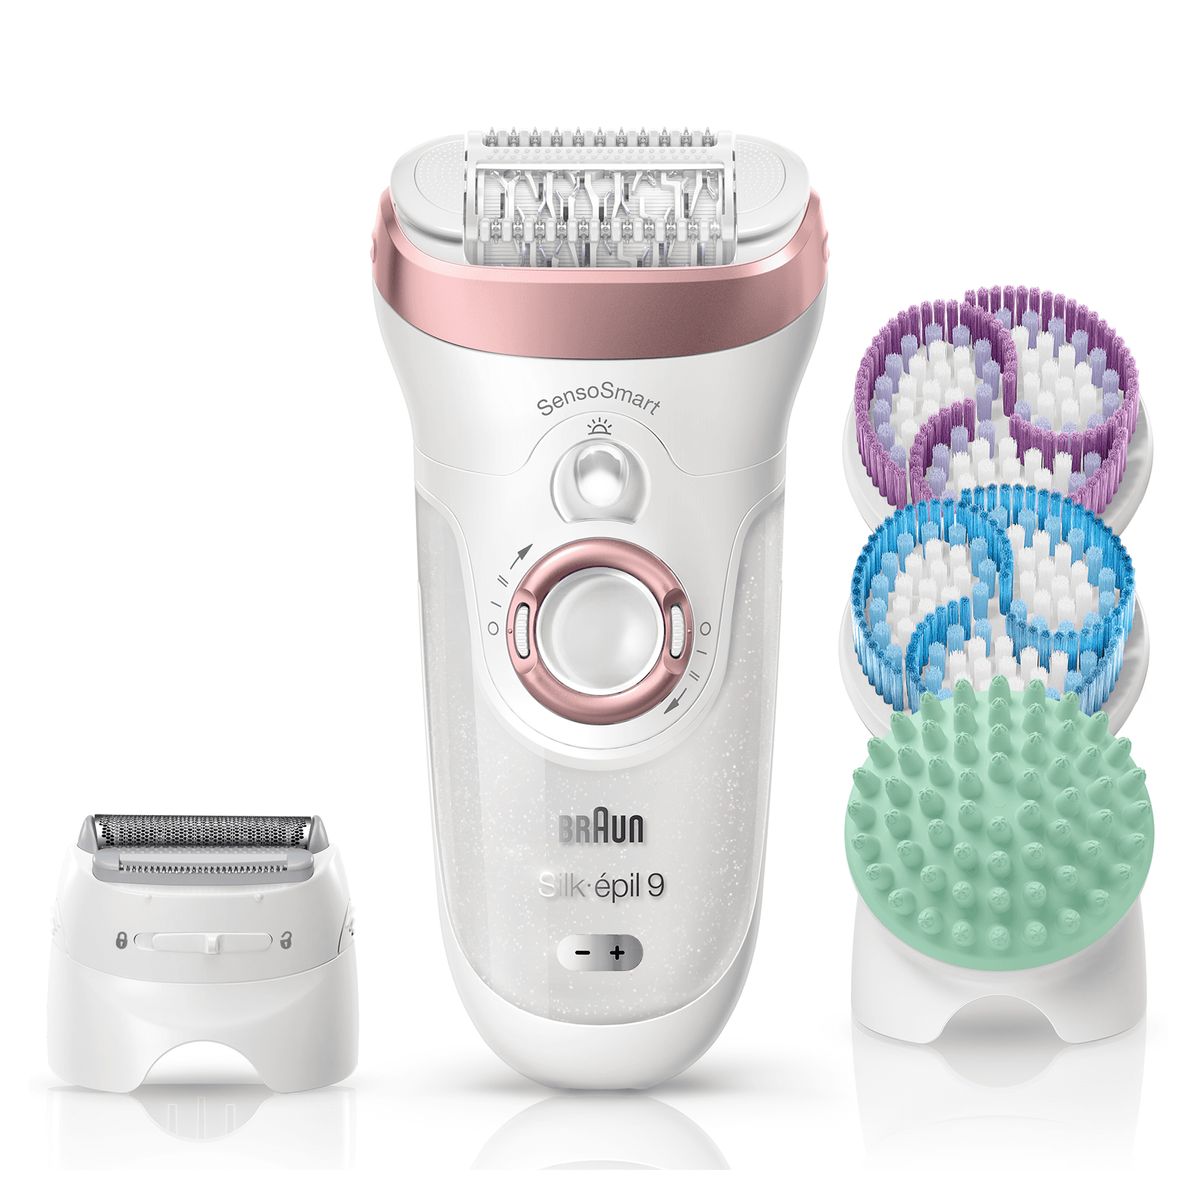 Braun Silk-epil 9 beauty set, epilator ladies for hair removal, attachments for shaver, exfoliation, massage for body, 9-990, rose/gold single